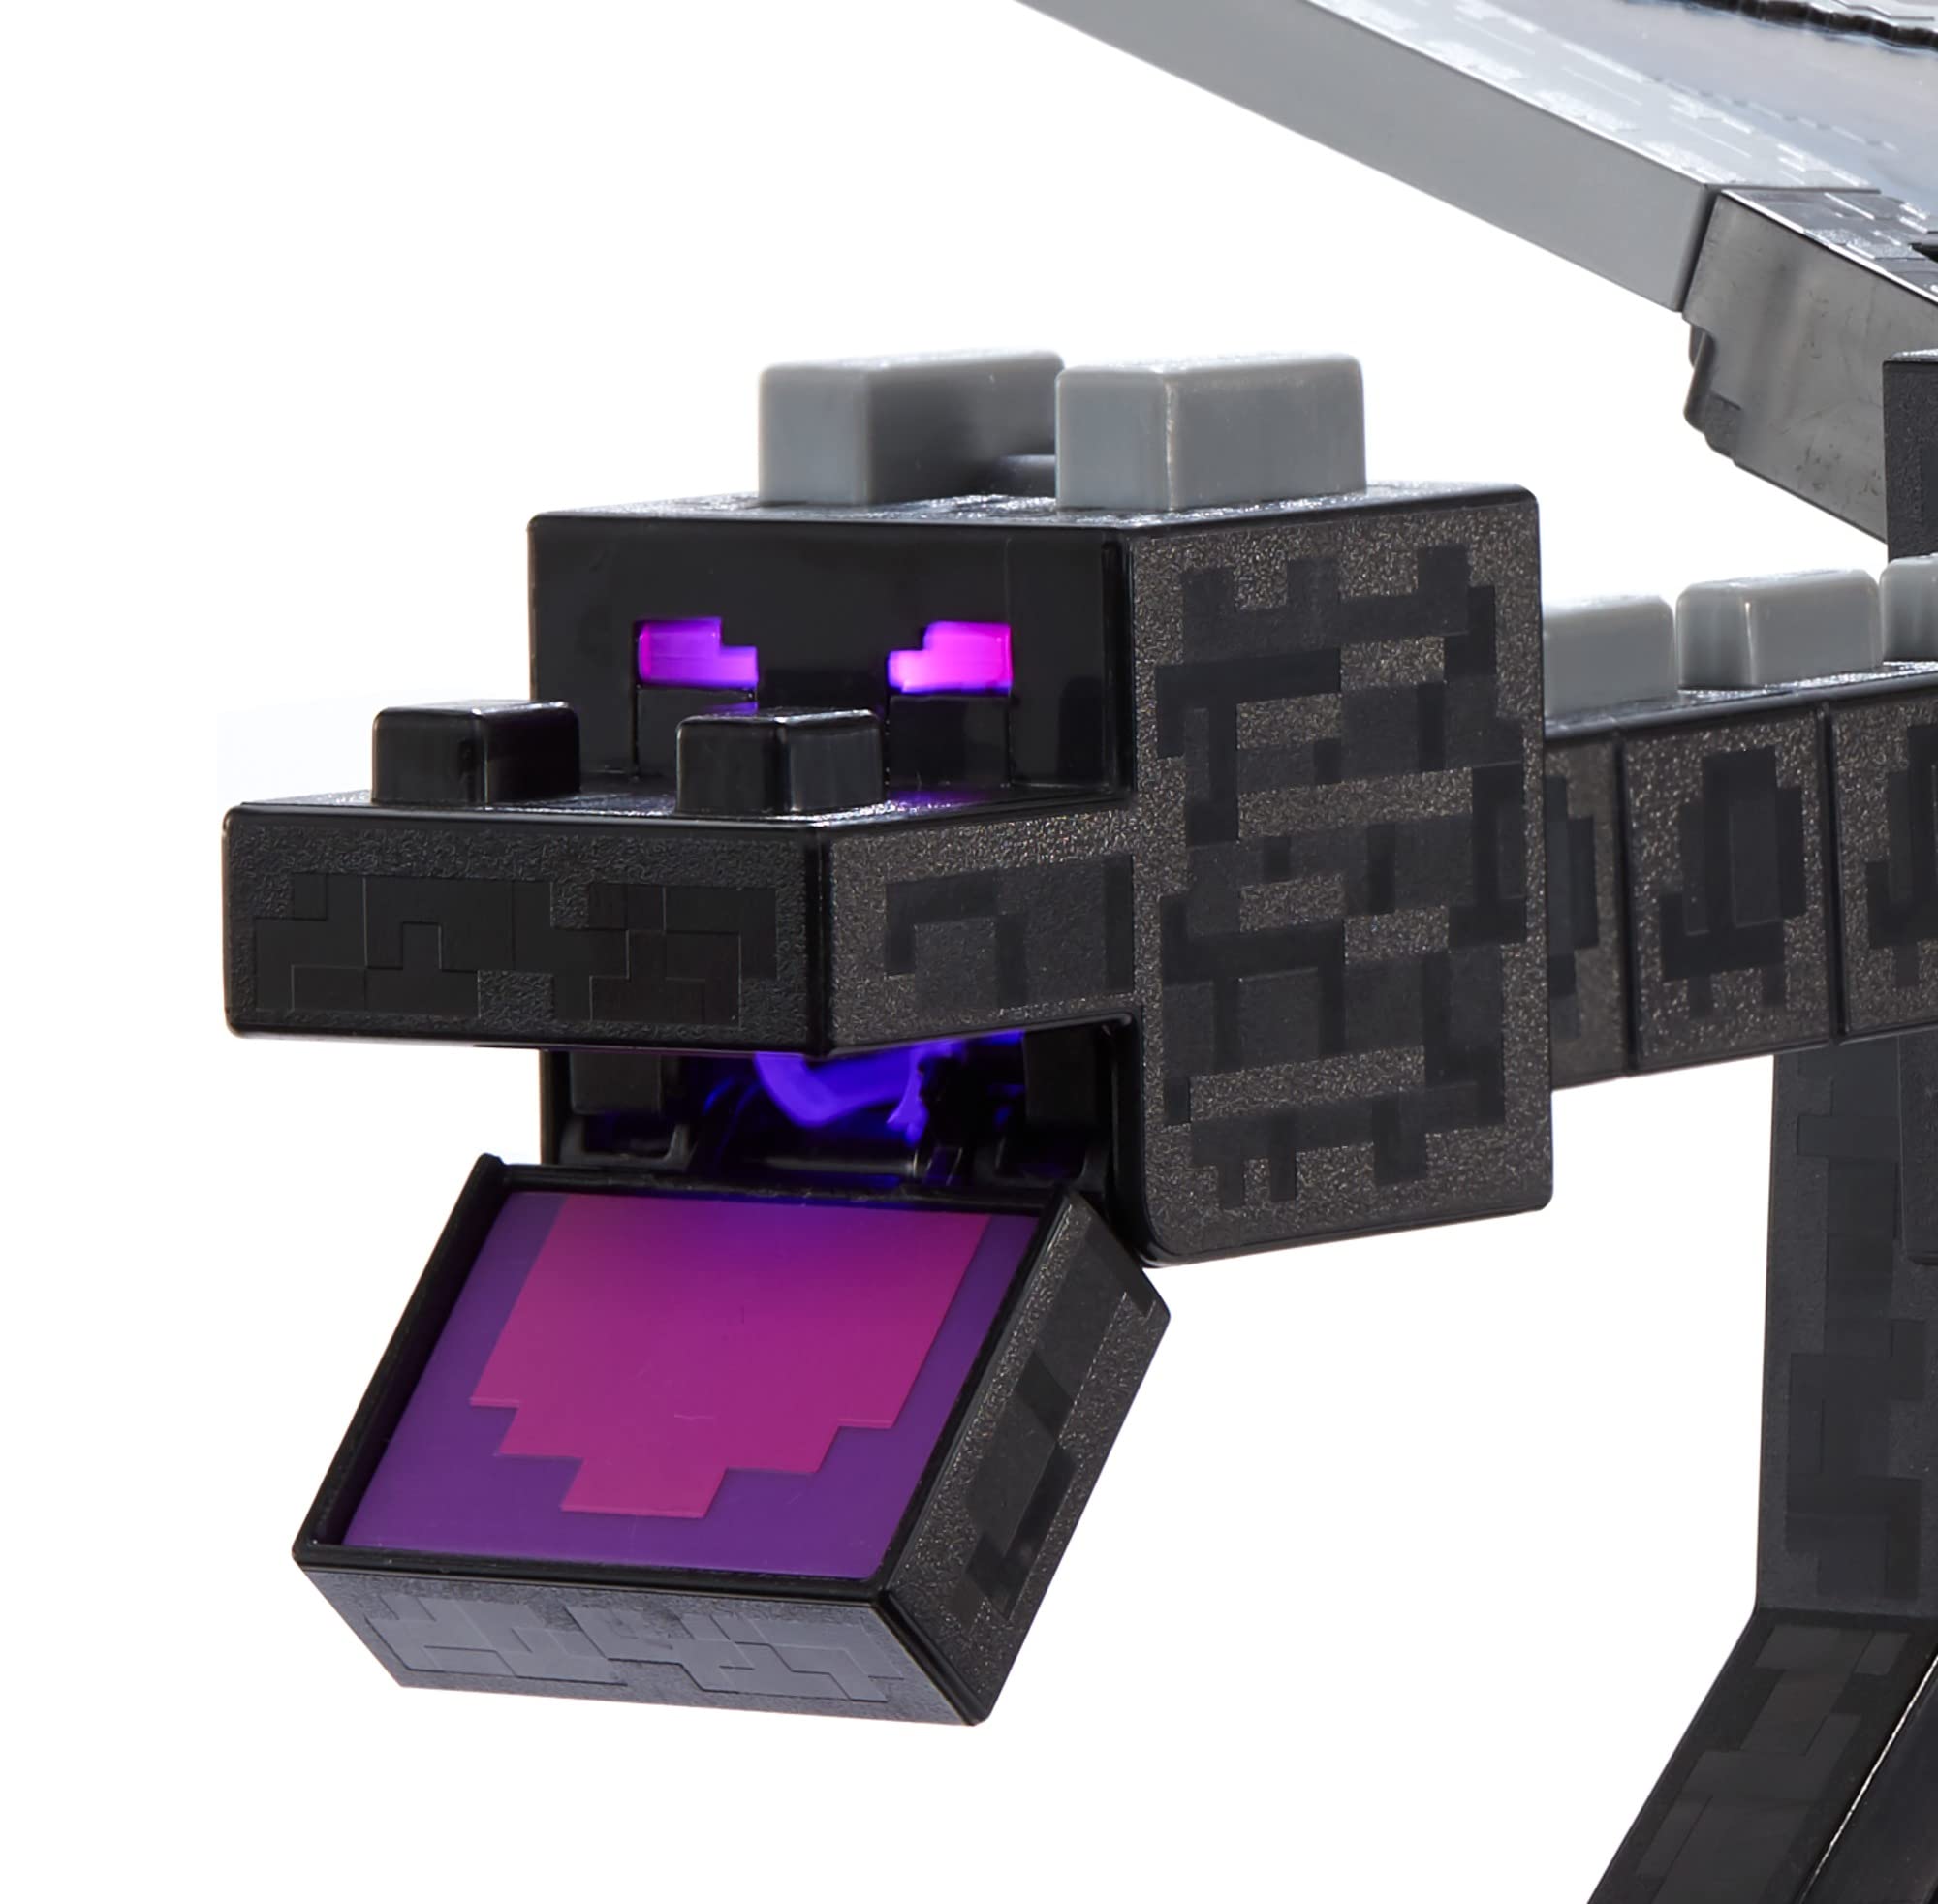  Mattel Minecraft Ultimate Ender Dragon Figure, 20-in  Mist-Breathing Creature, Plus 3.25-in Color-Change Steve Figure, Weapon,  Amor and Battle Accessory, Gift for 6 Years Old and Up ( Exclusive) :  Musical Instruments